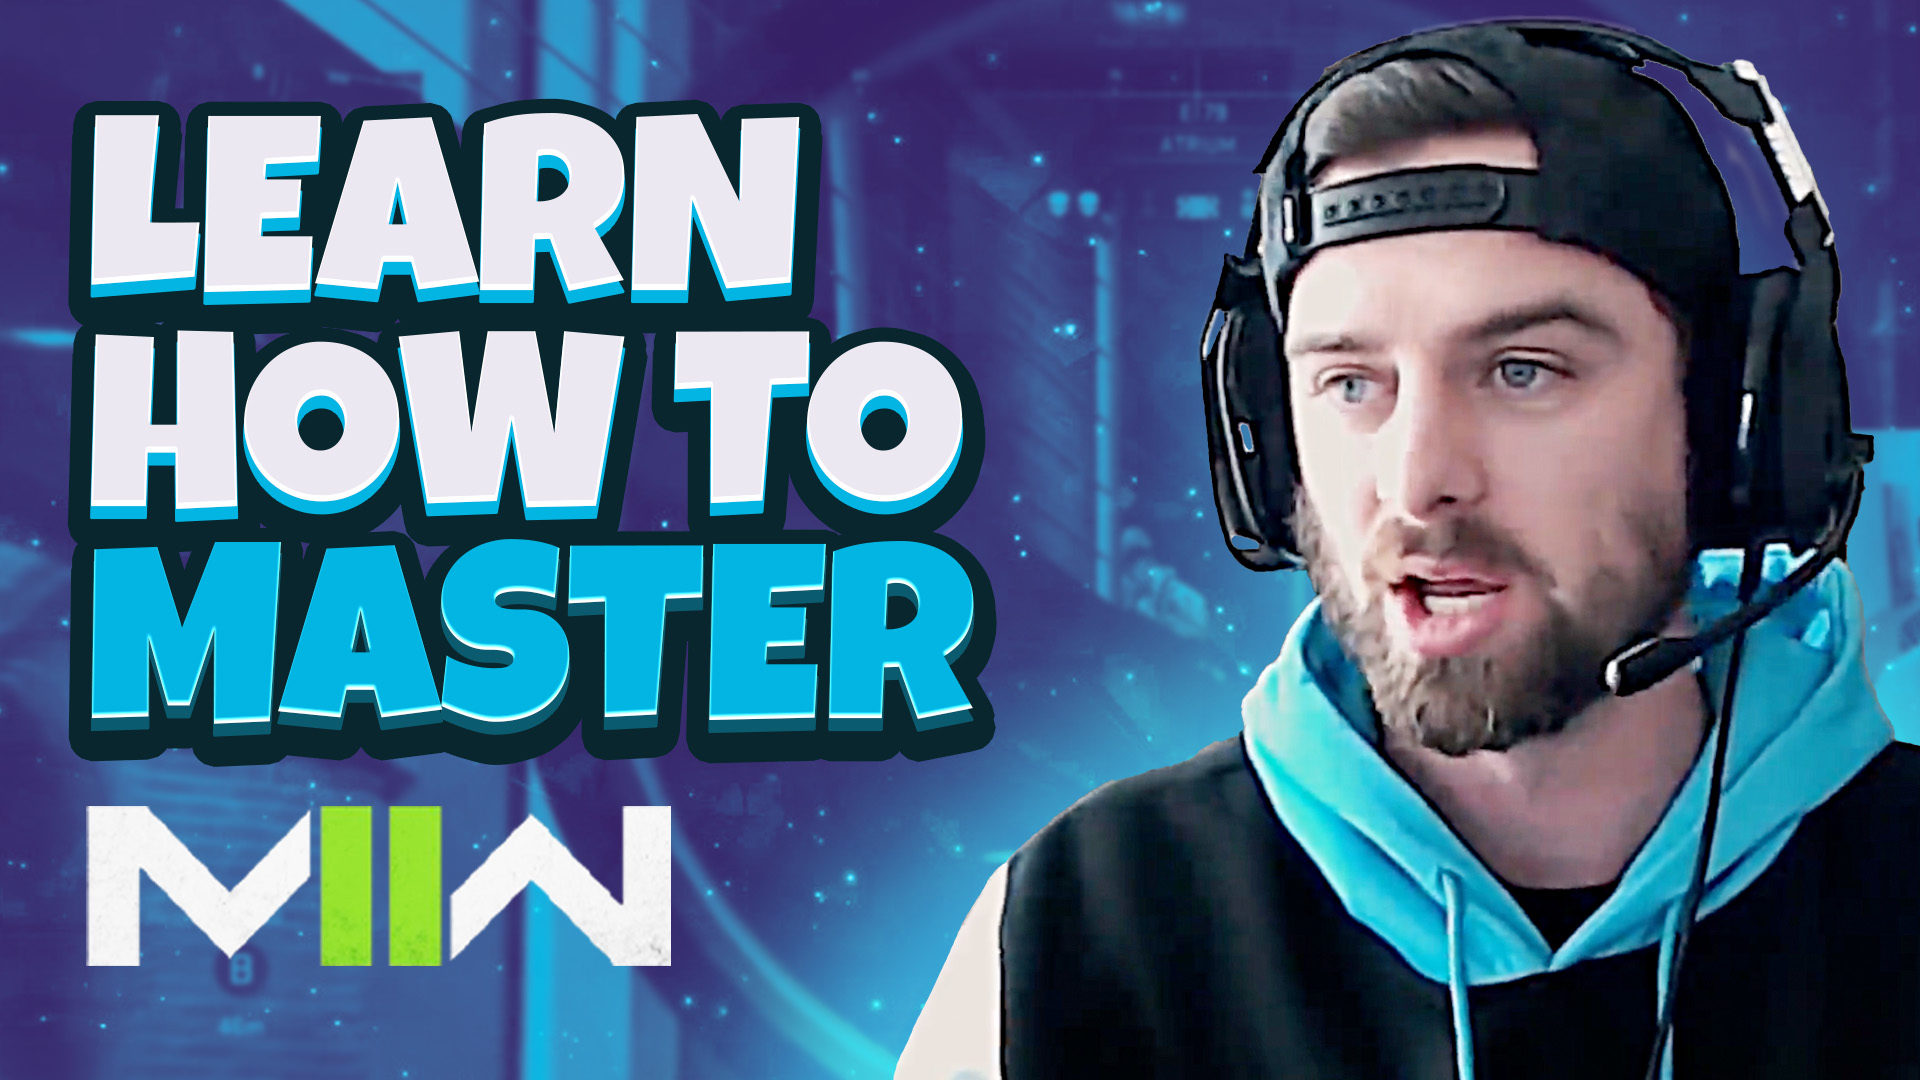 Learn how to master MWII